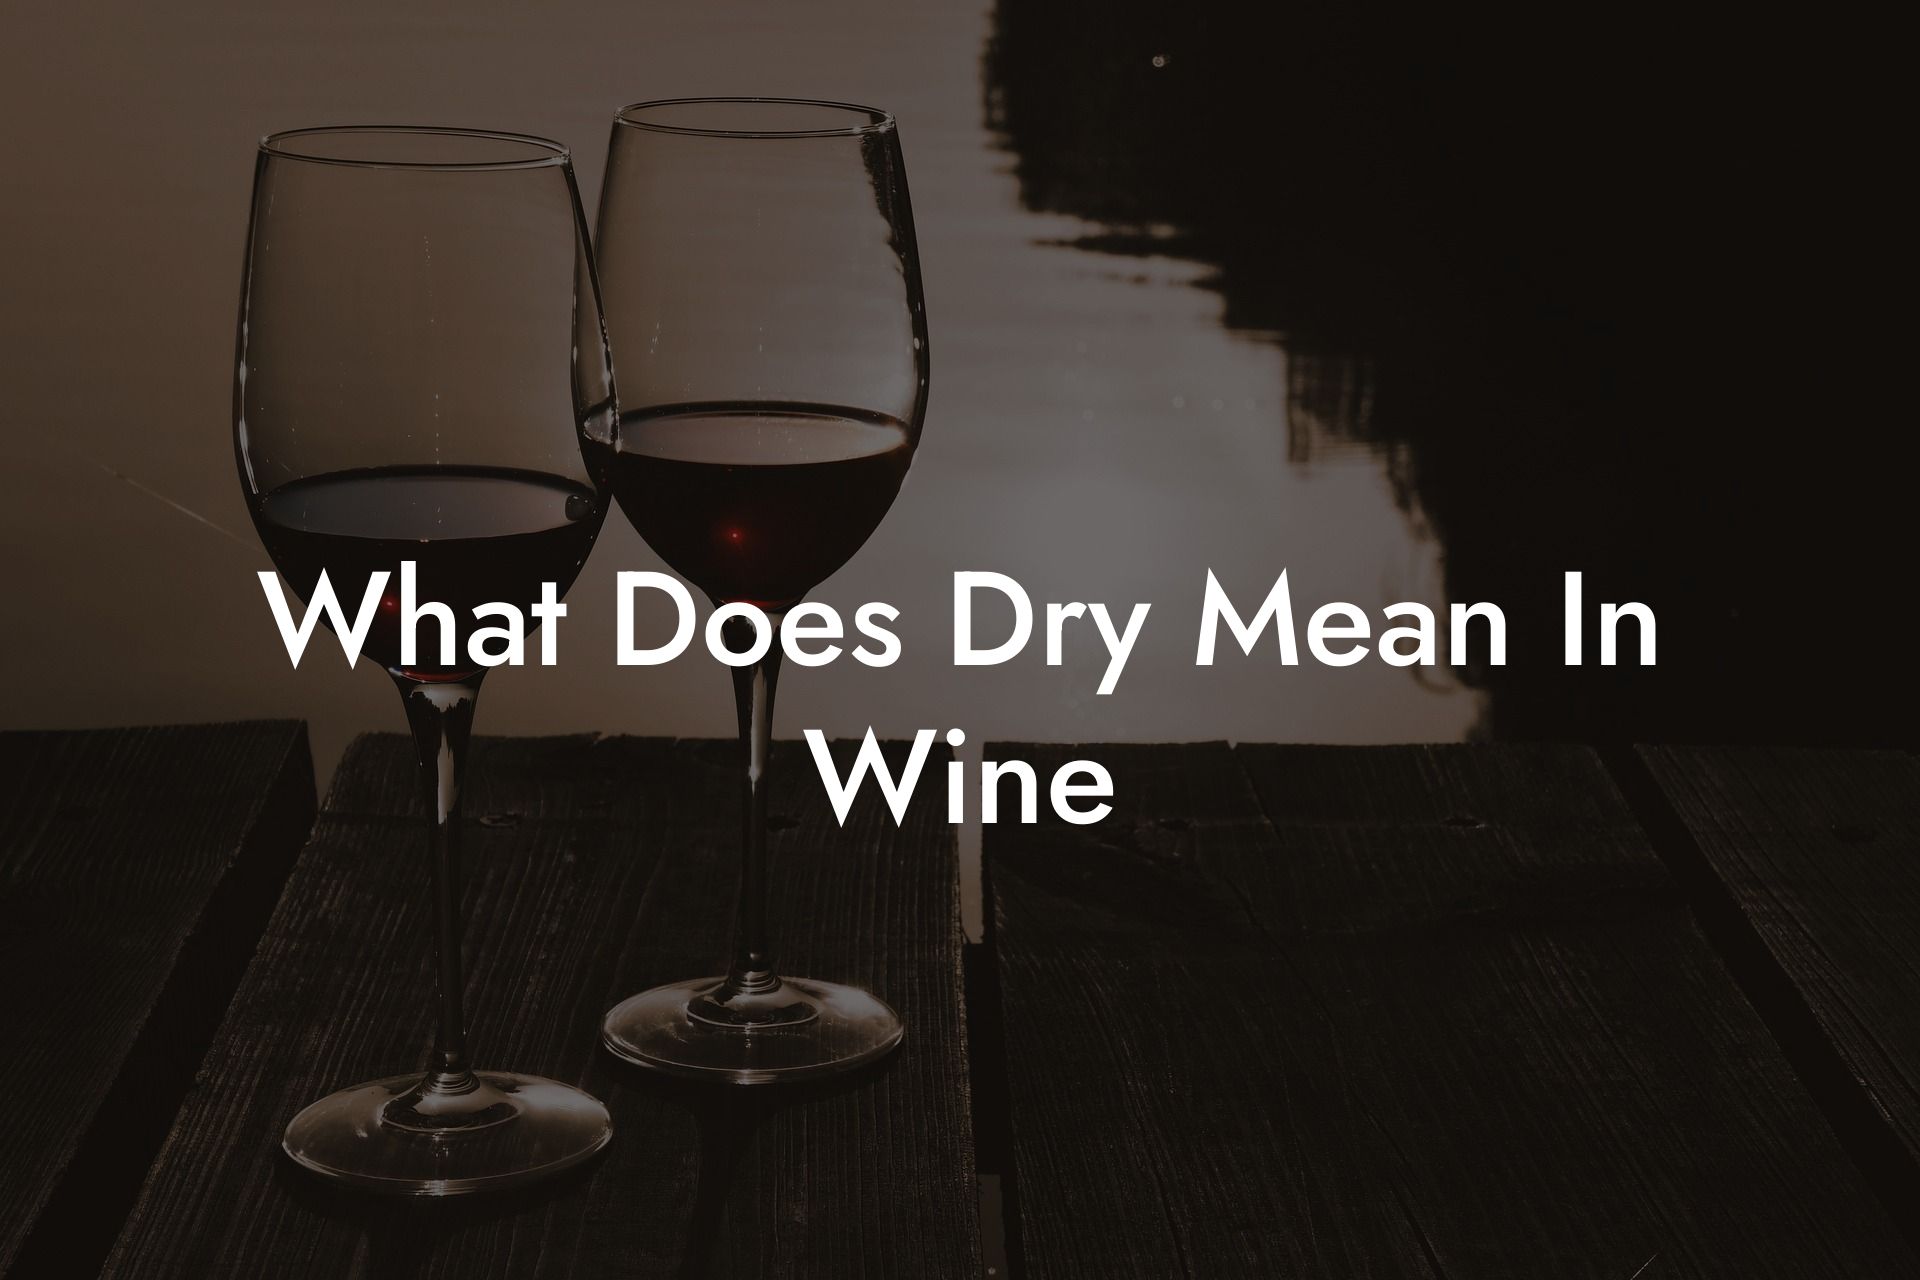 What Does Dry Mean In Wine